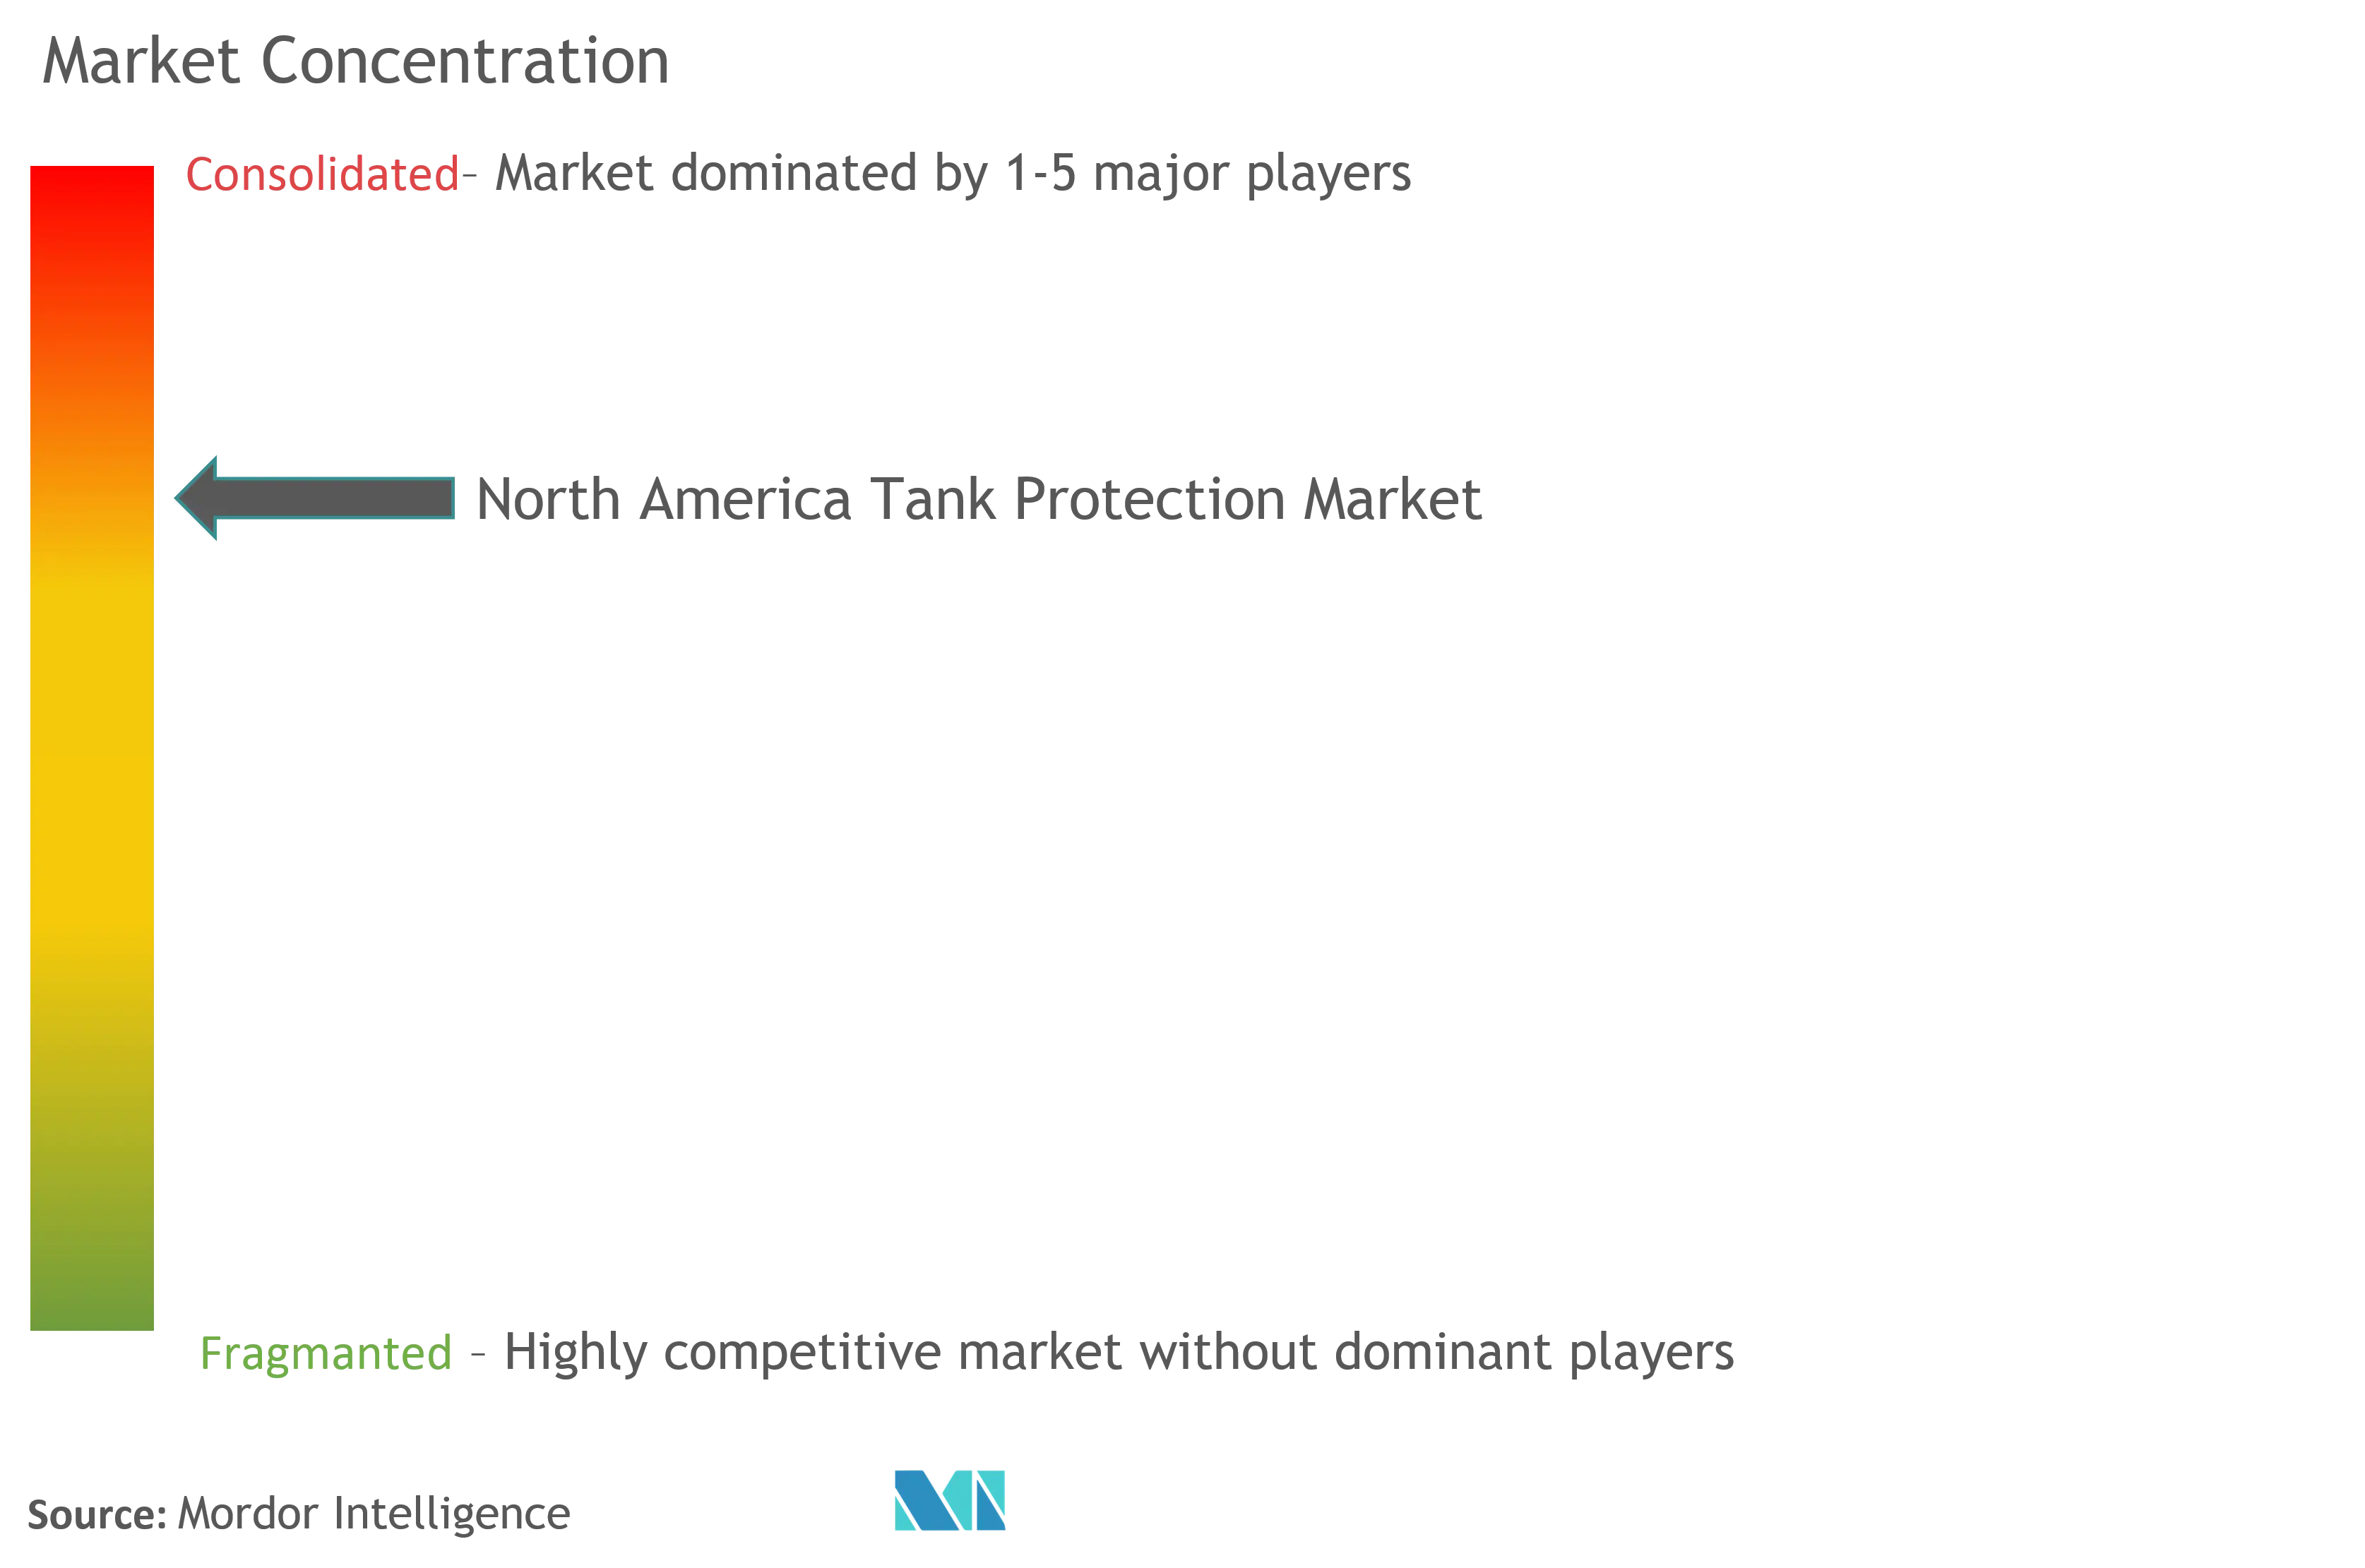 North America Tank Protection Market Concentration